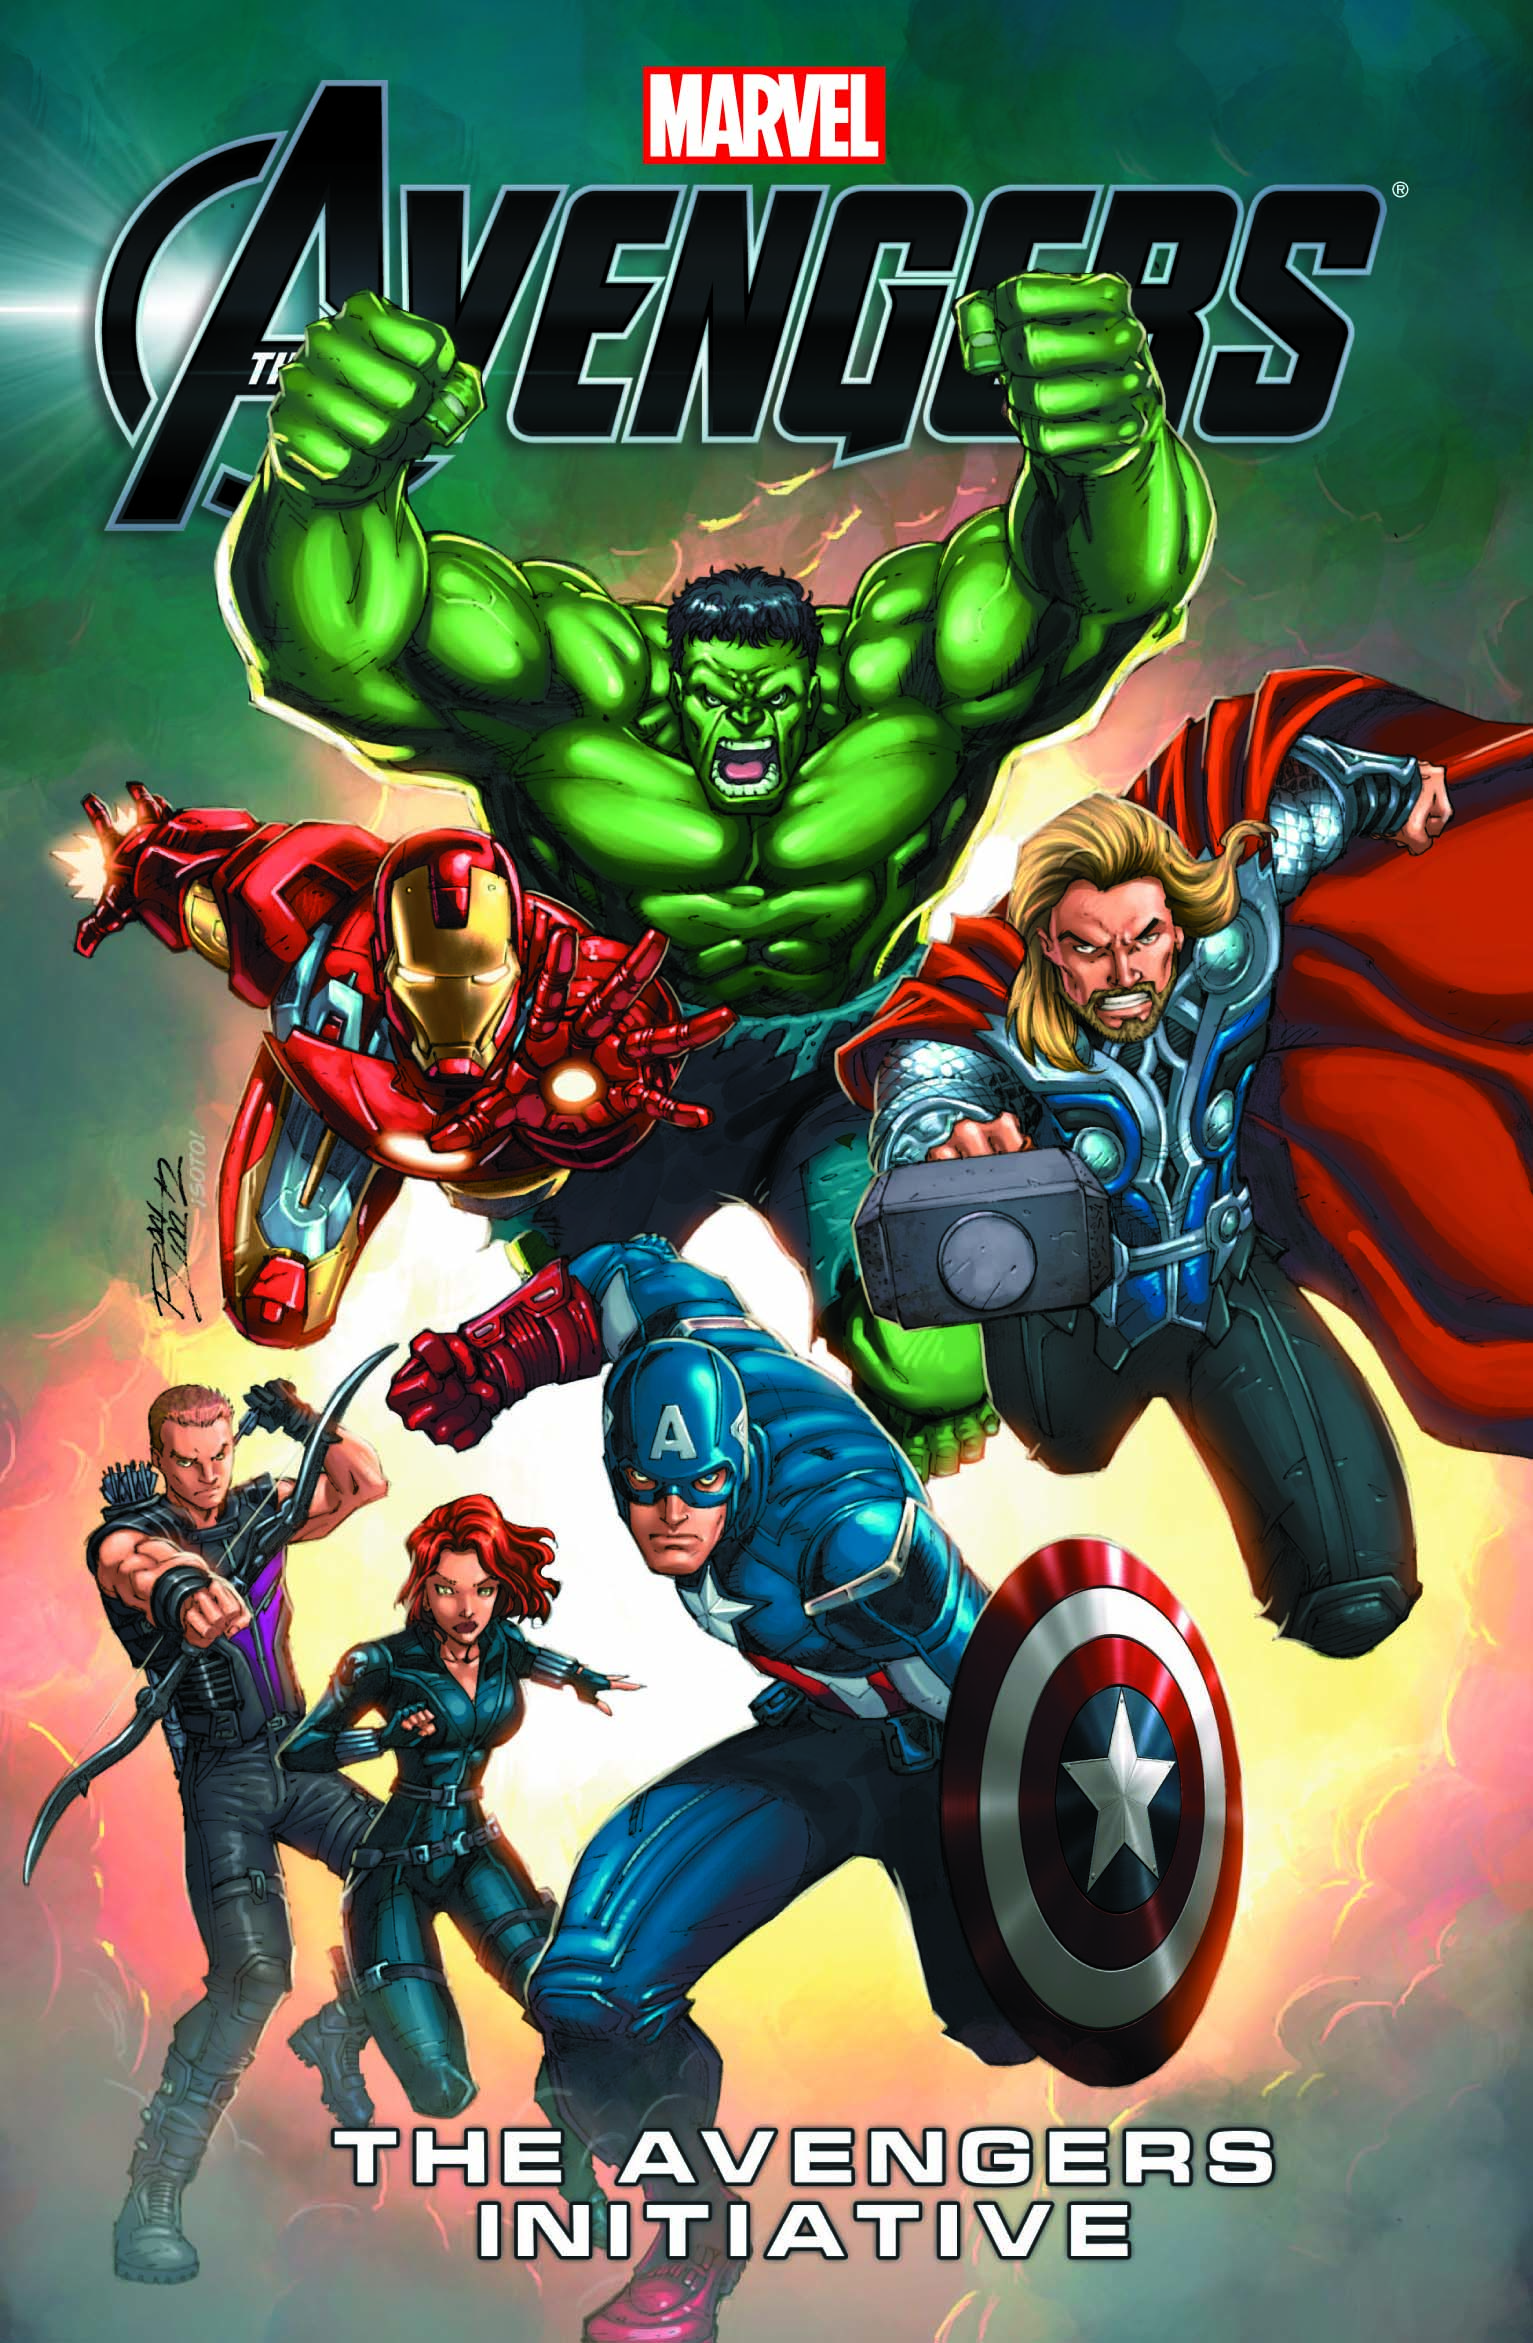 Marvel's the Avengers: The Avengers Initiative (Trade Paperback)